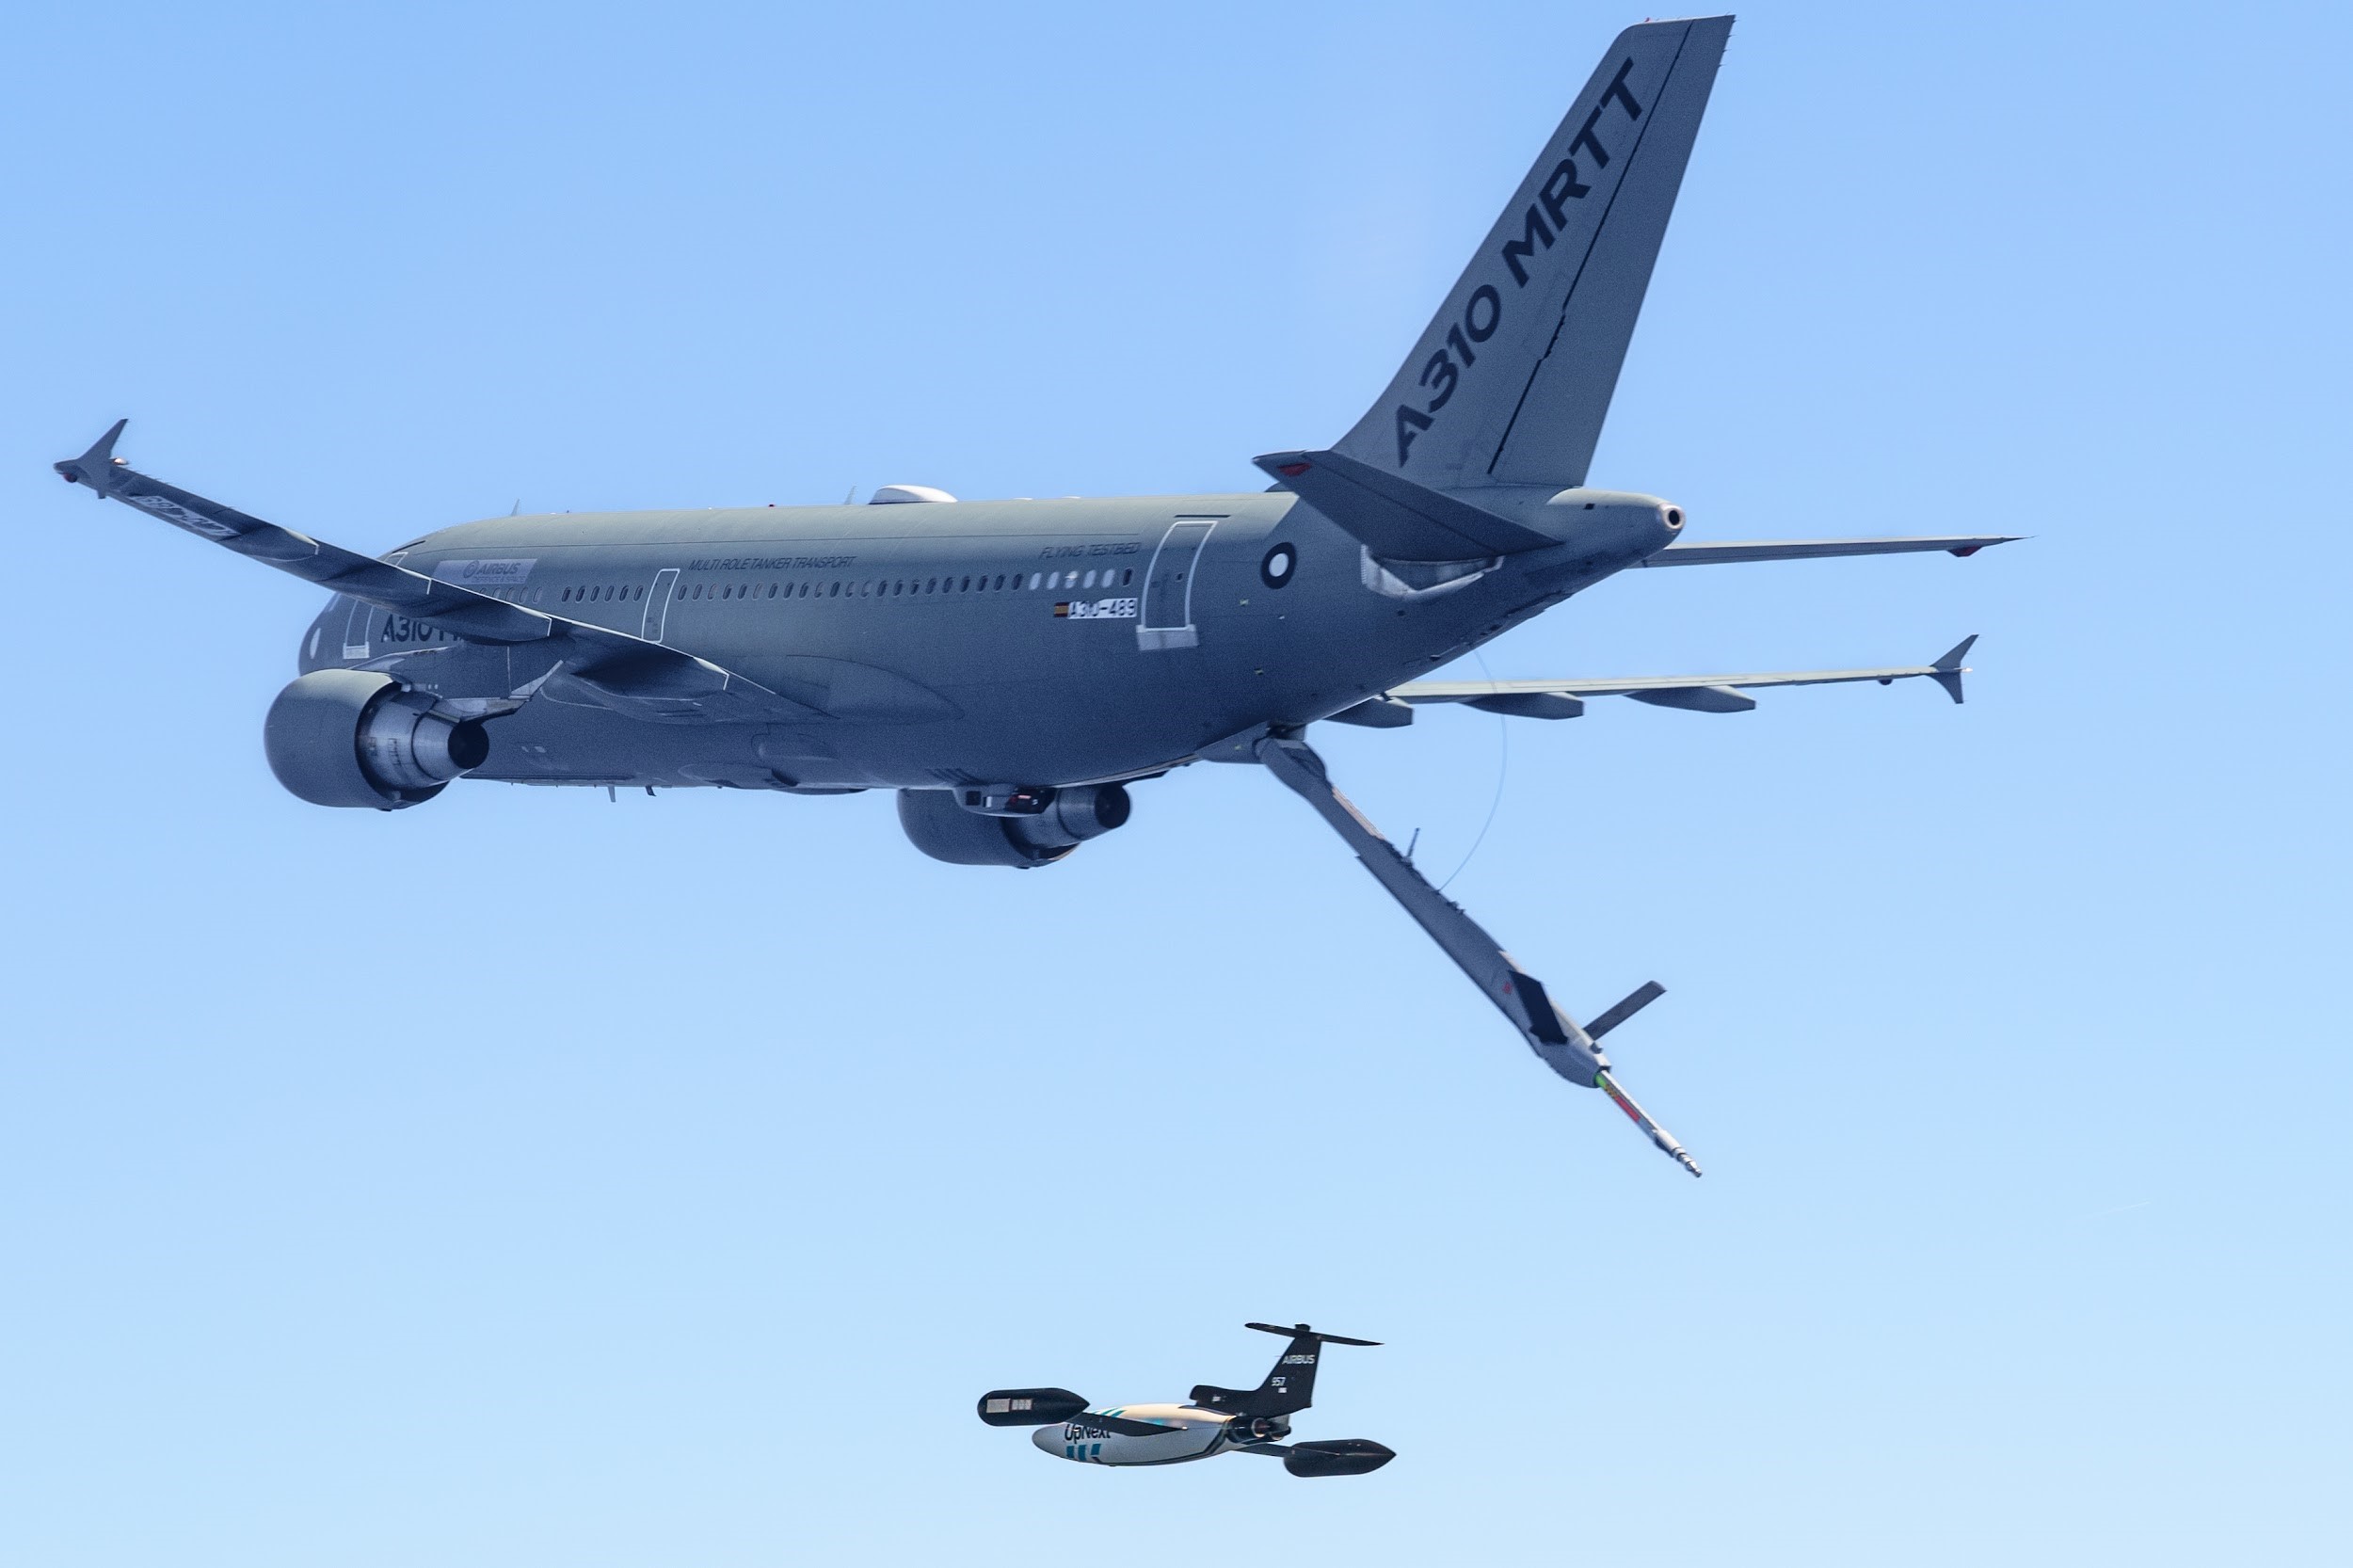 En - Airbus achieves in-flight autonomous guidance and control of a drone from a tanker aircraft 70199939-dfd2-4b6d-851b-23f90080b39b